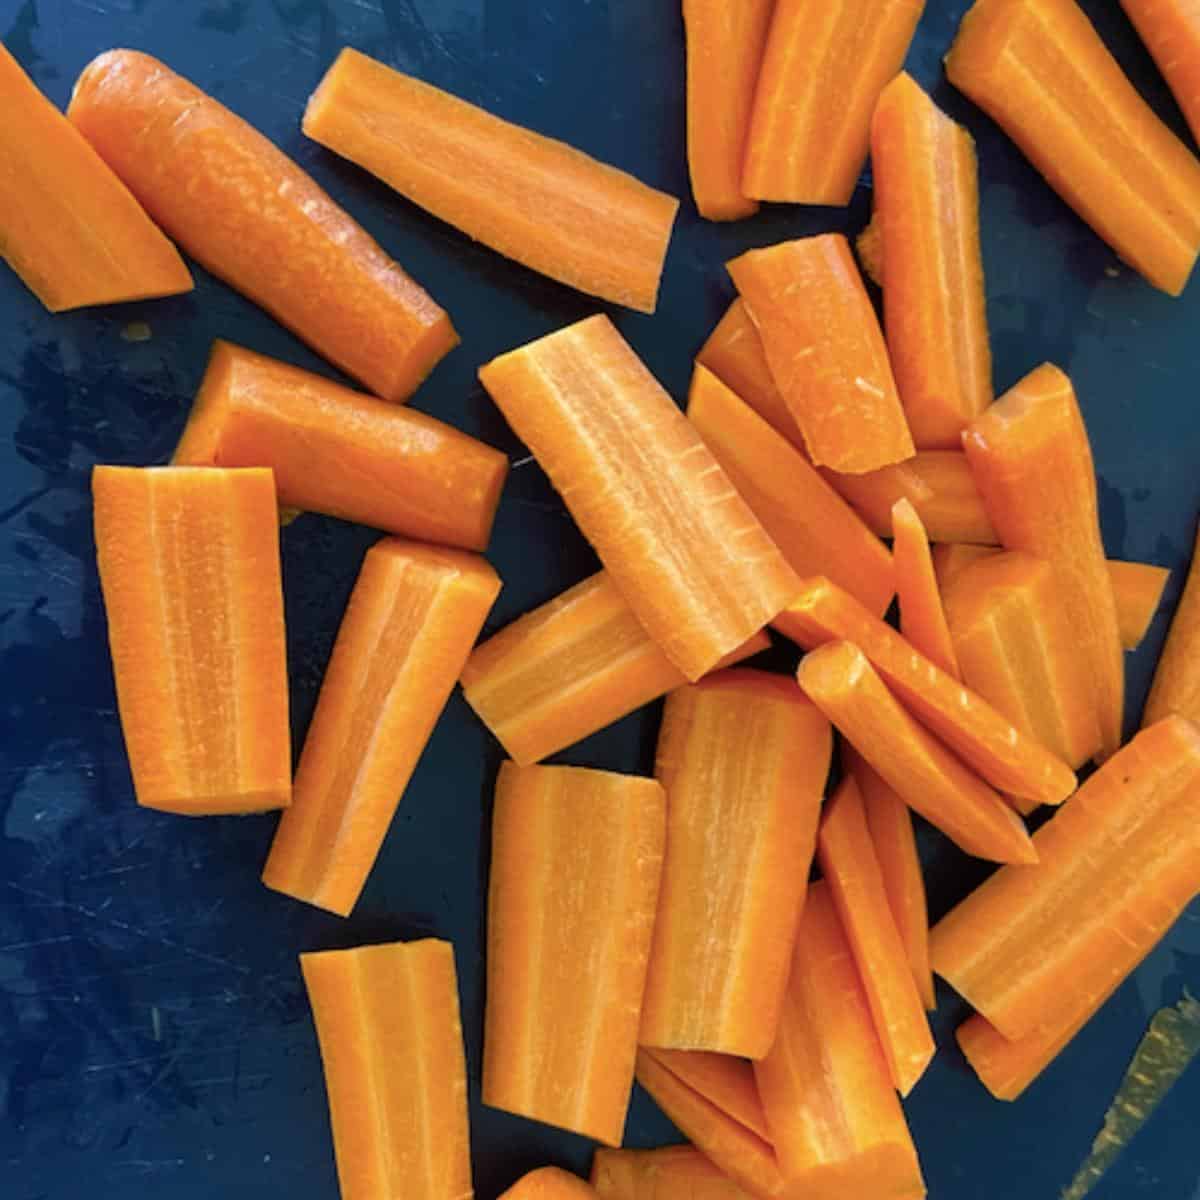 carrots cut into pieces on cutting board